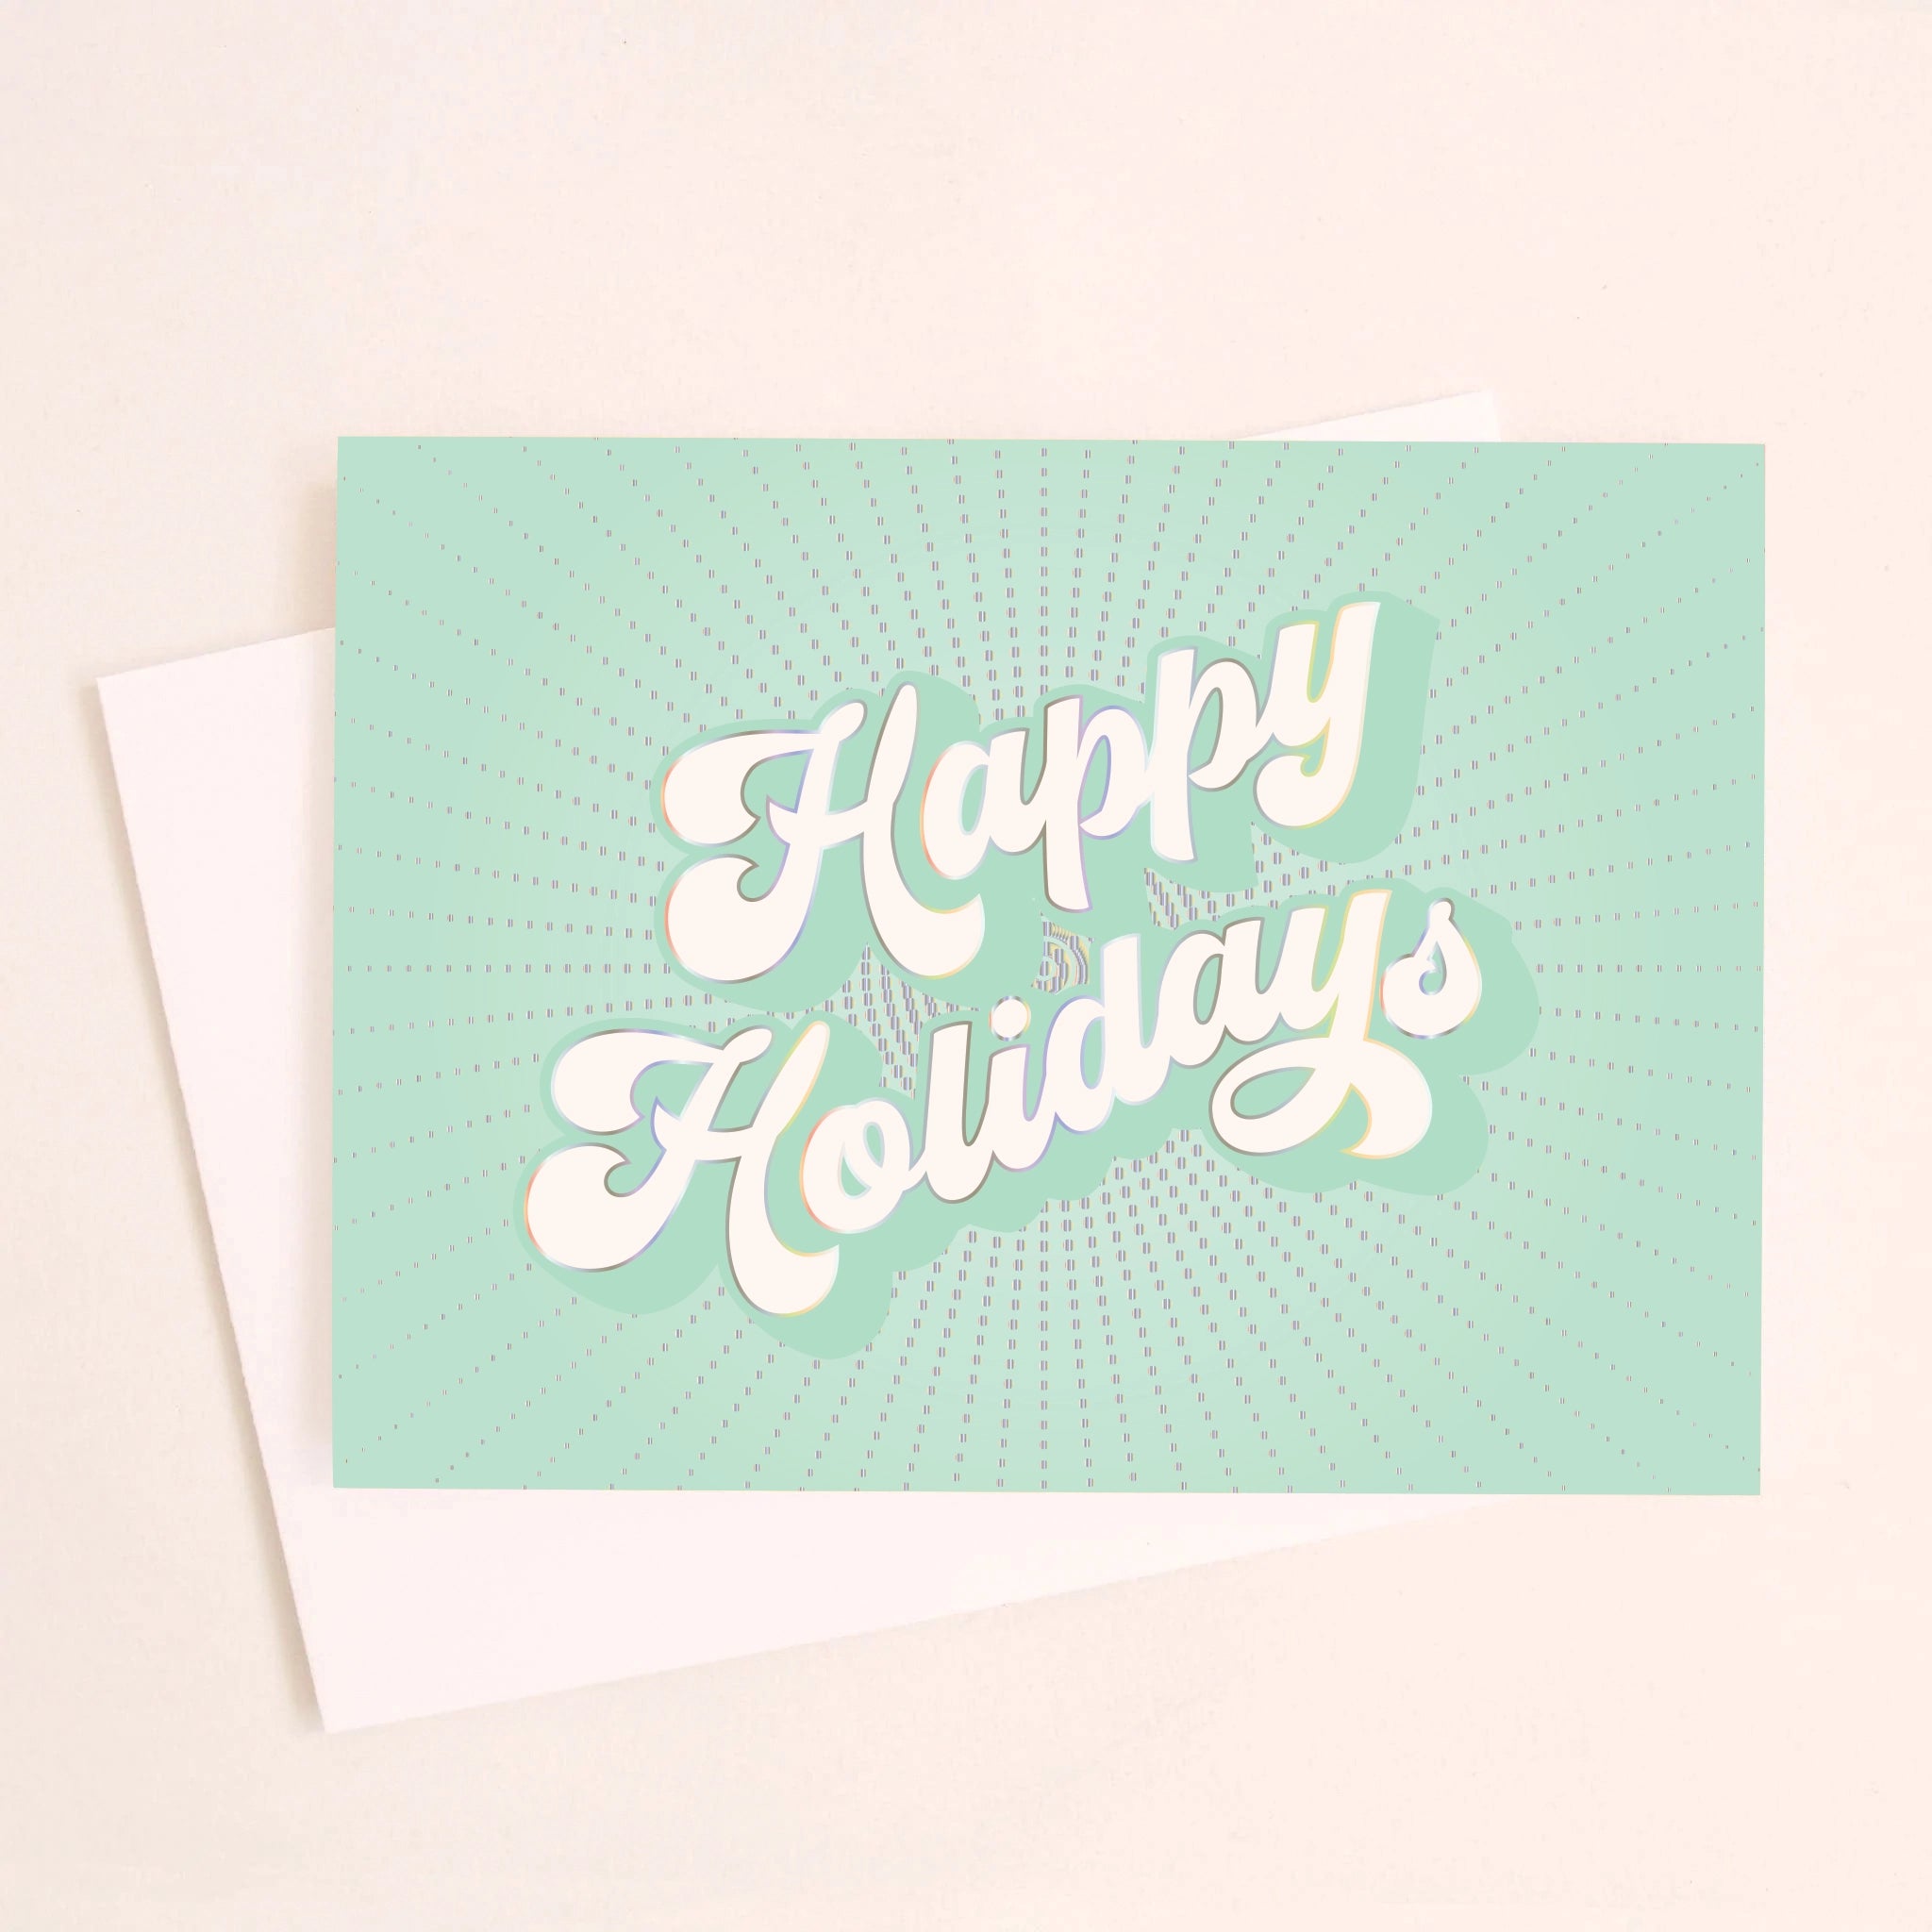 On an ivory background is a teal holiday greeting card with white text that reads, "Happy Holidays" along with a coordinating white envelope.